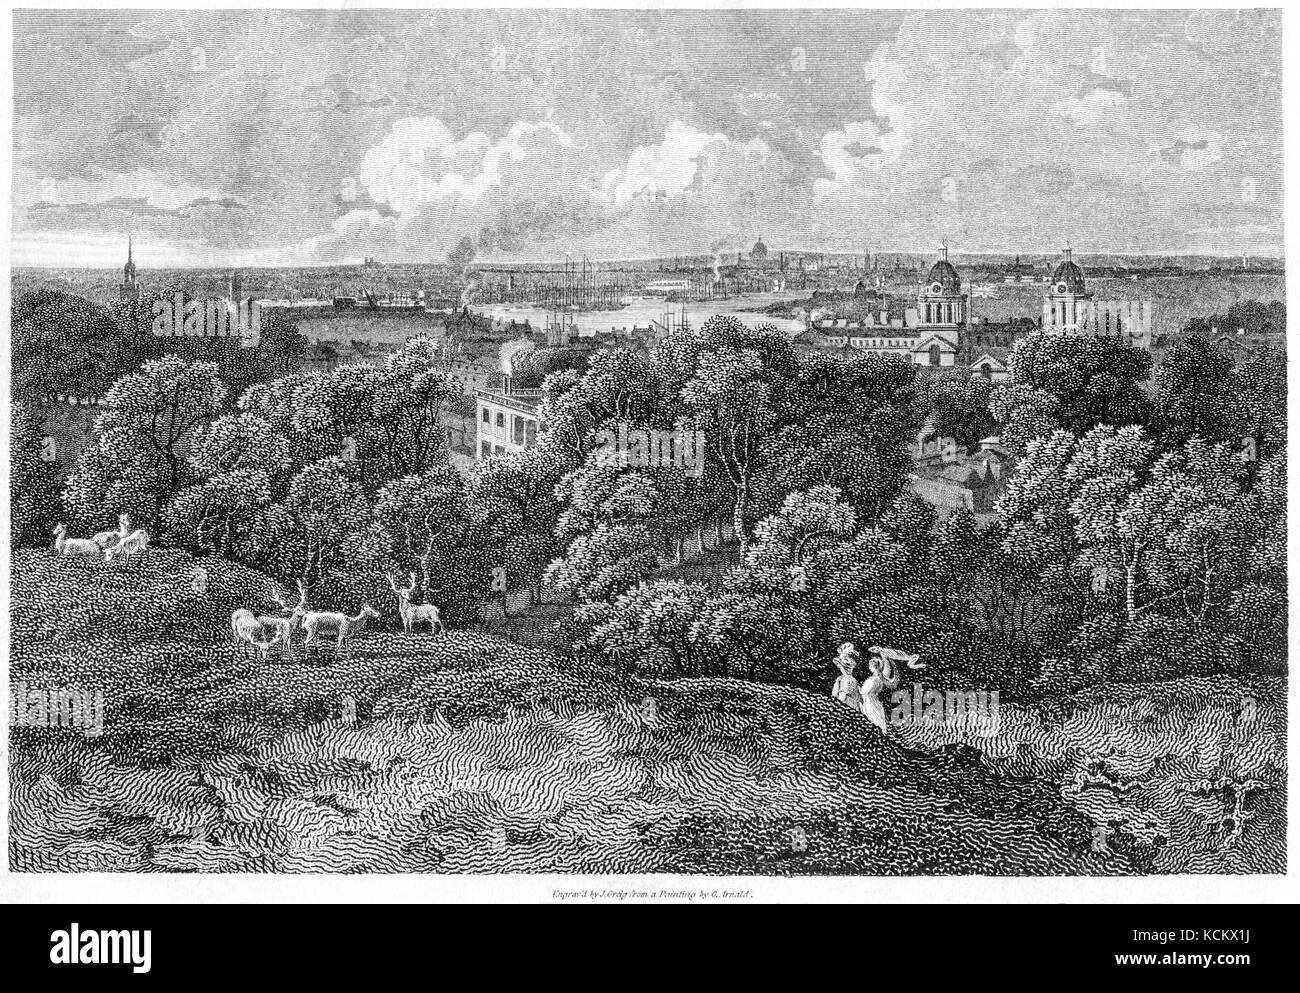 An engraving of London UK from Greenwich Park, Kent scanned at high resolution from a book printed in 1819. Believed copyright free. Stock Photo